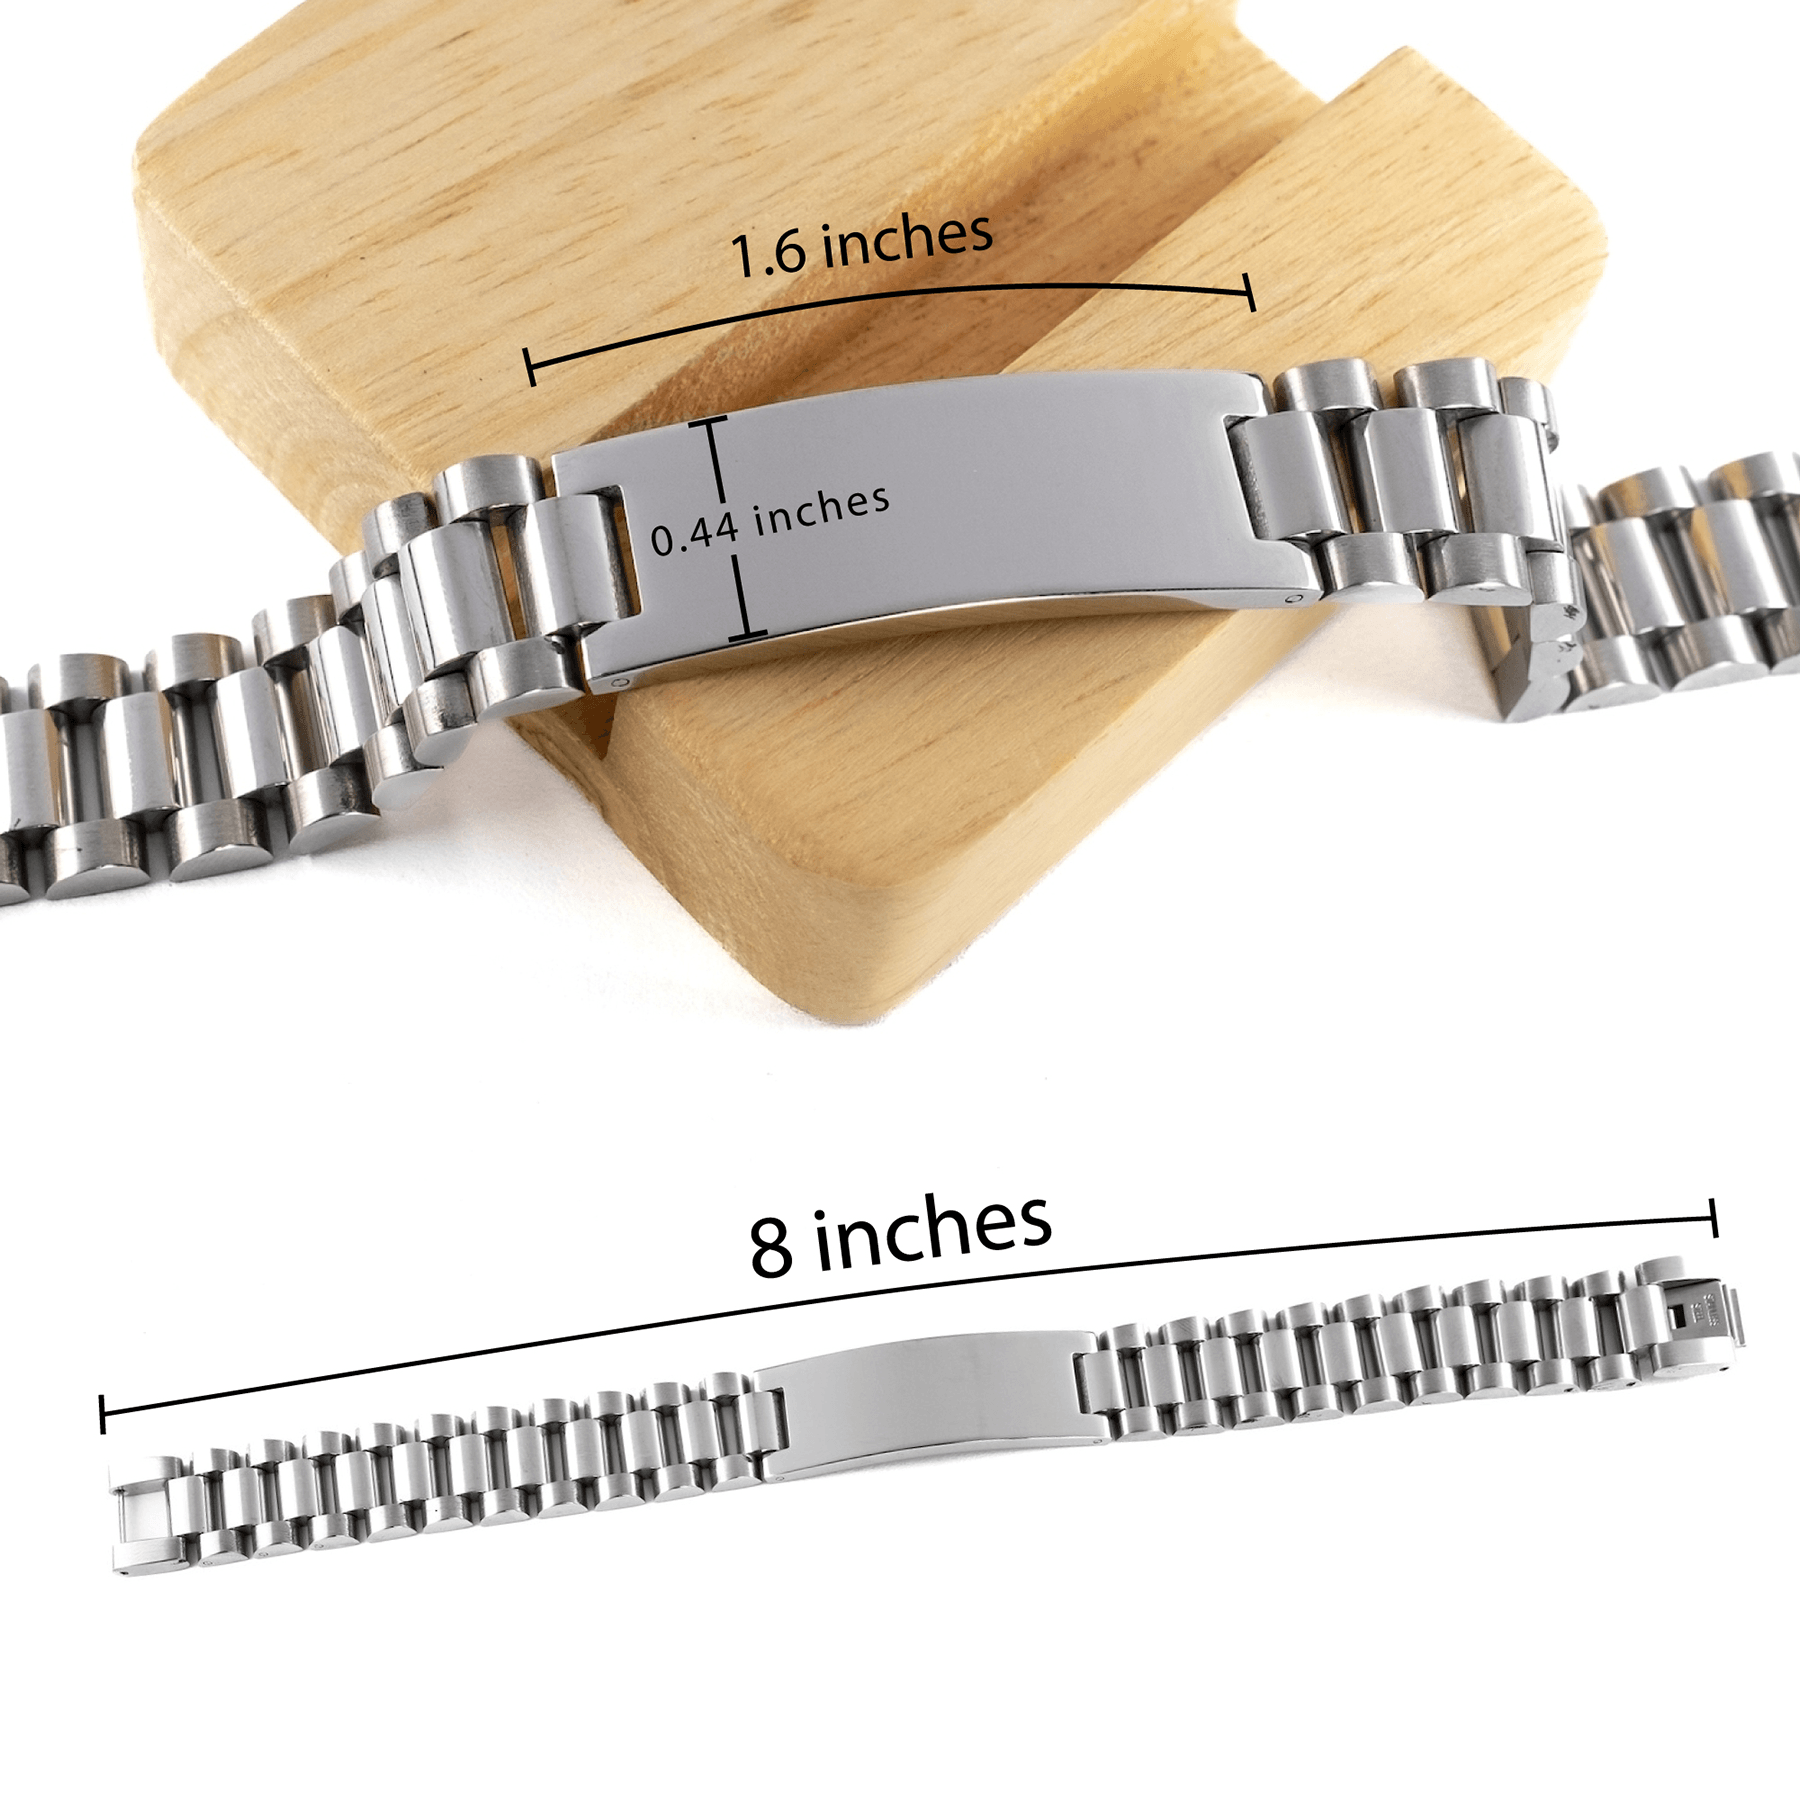 Remarkable Physical Therapist Gifts, Your dedication and hard work, Inspirational Birthday Christmas Unique Ladder Stainless Steel Bracelet For Physical Therapist, Coworkers, Men, Women, Friends - Mallard Moon Gift Shop